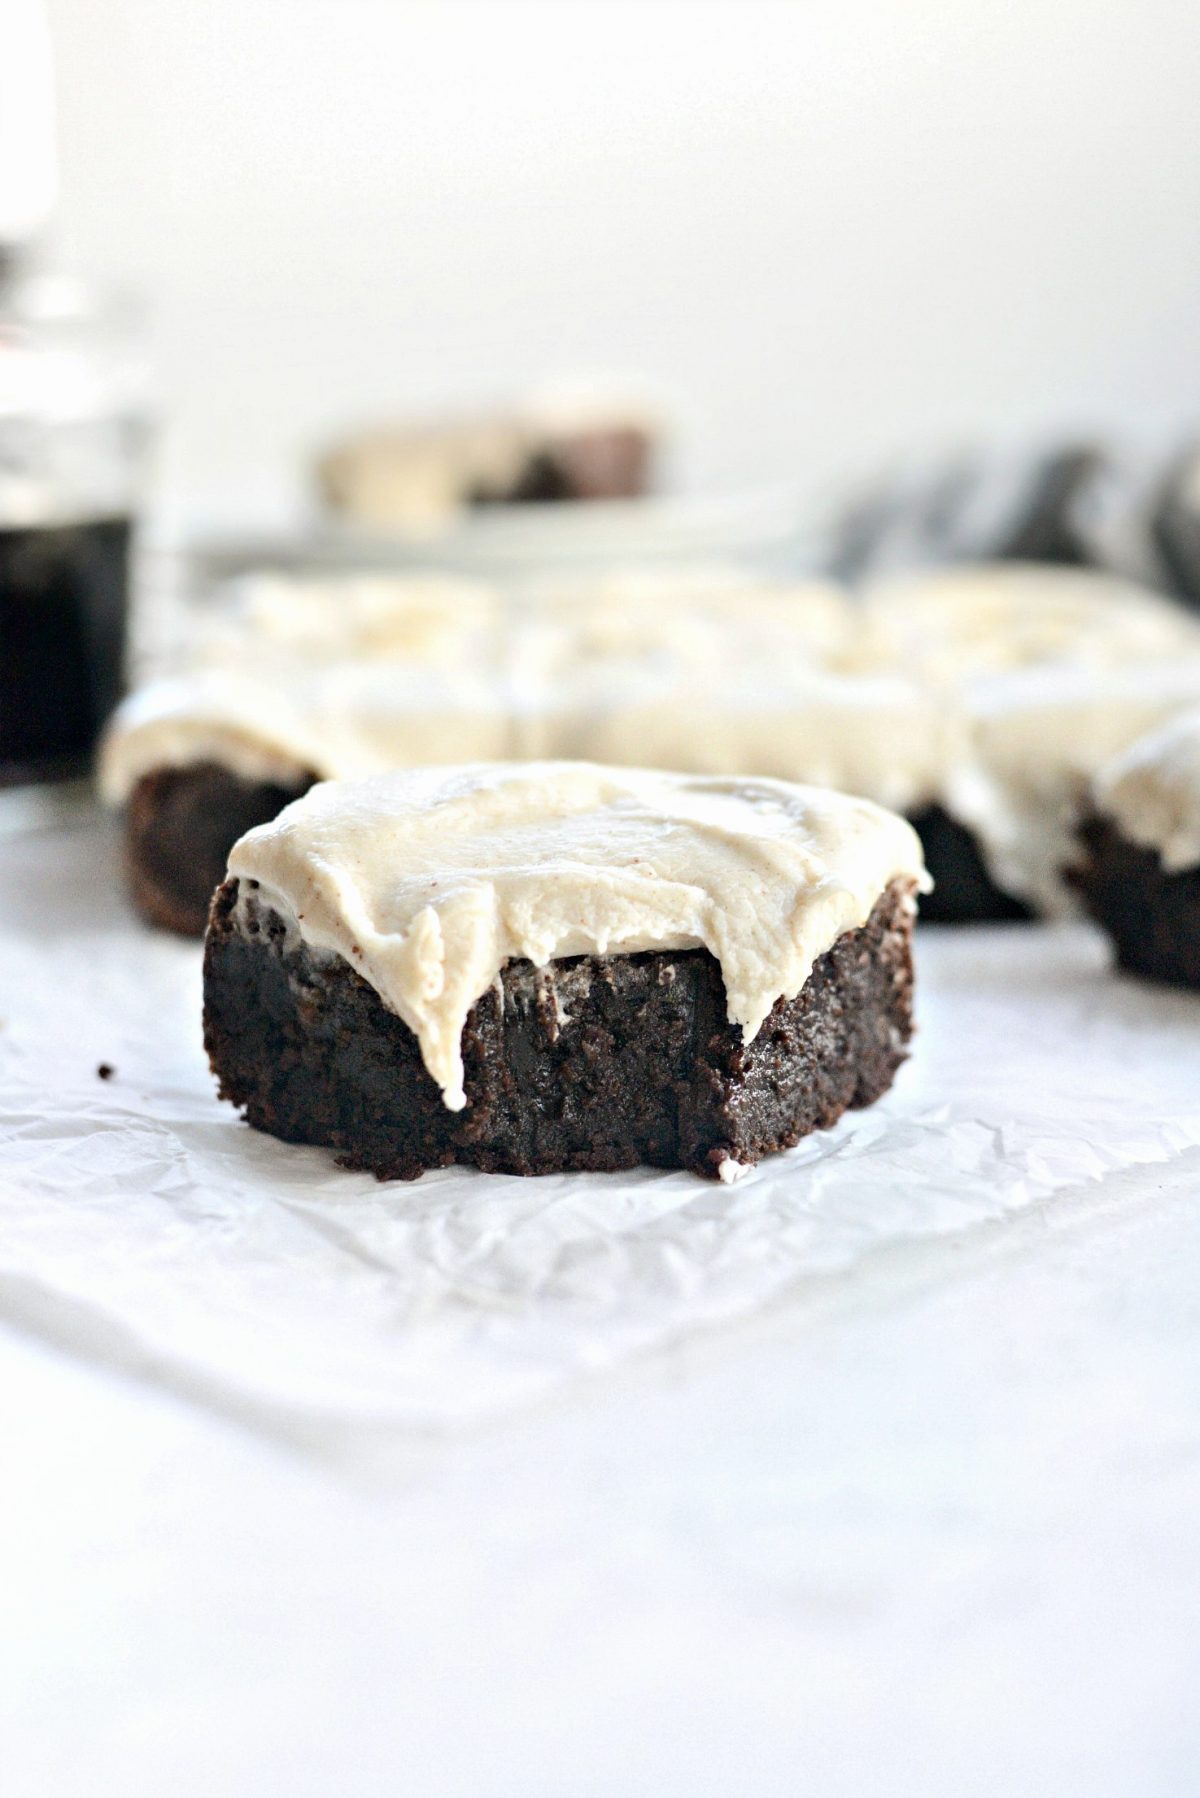 Chocolate-Guinness-Brownies-with-Brown-Butter-Stout-Frosting-l-SimplyScratch.com-30